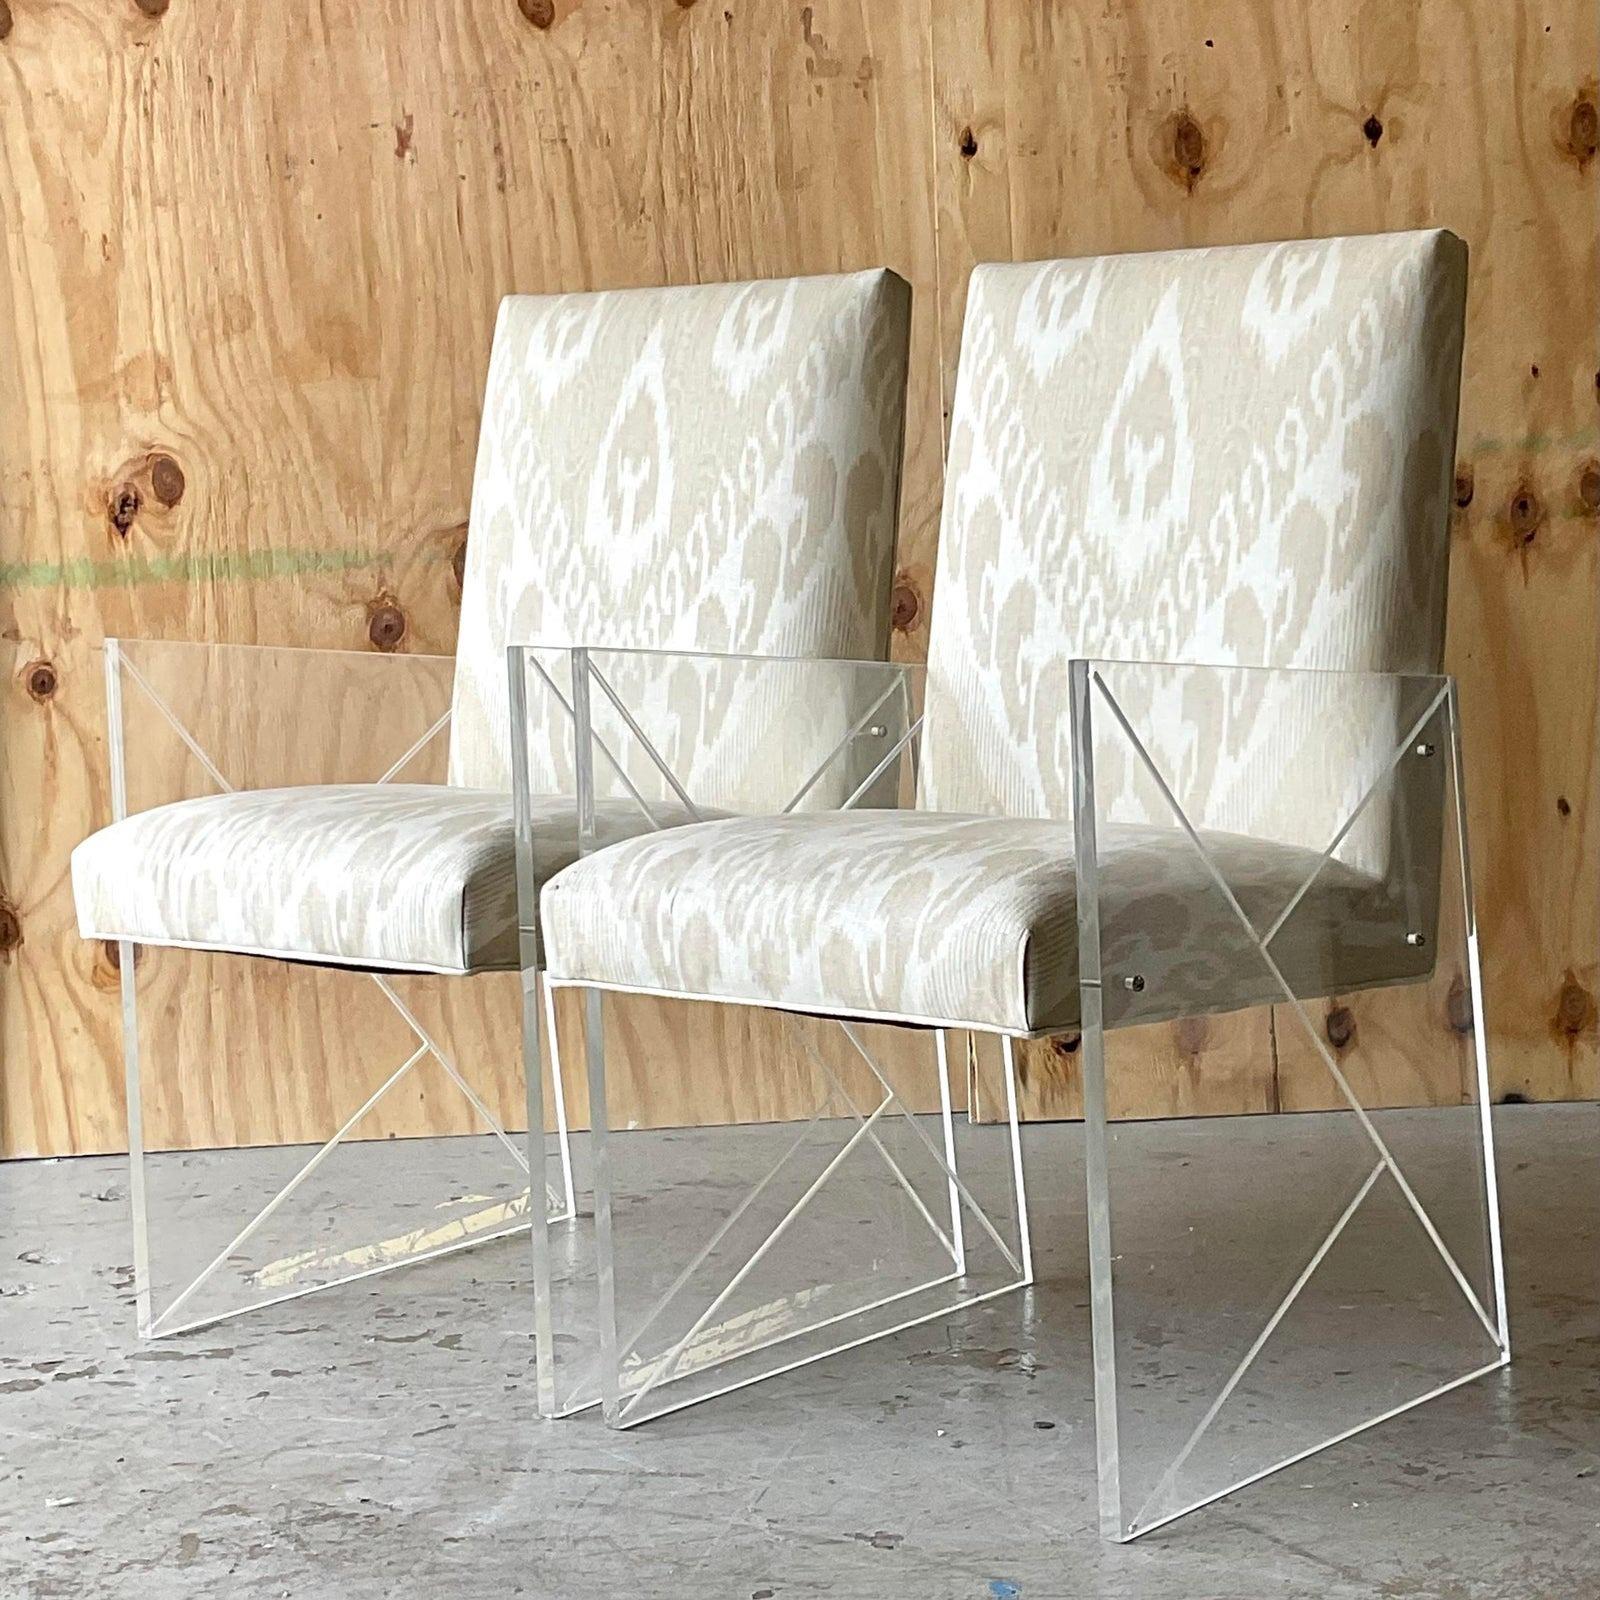 Mid-20th Century Vintage Boho French 60s Lucite Host Chairs in Thibaut Ikat - a Pair